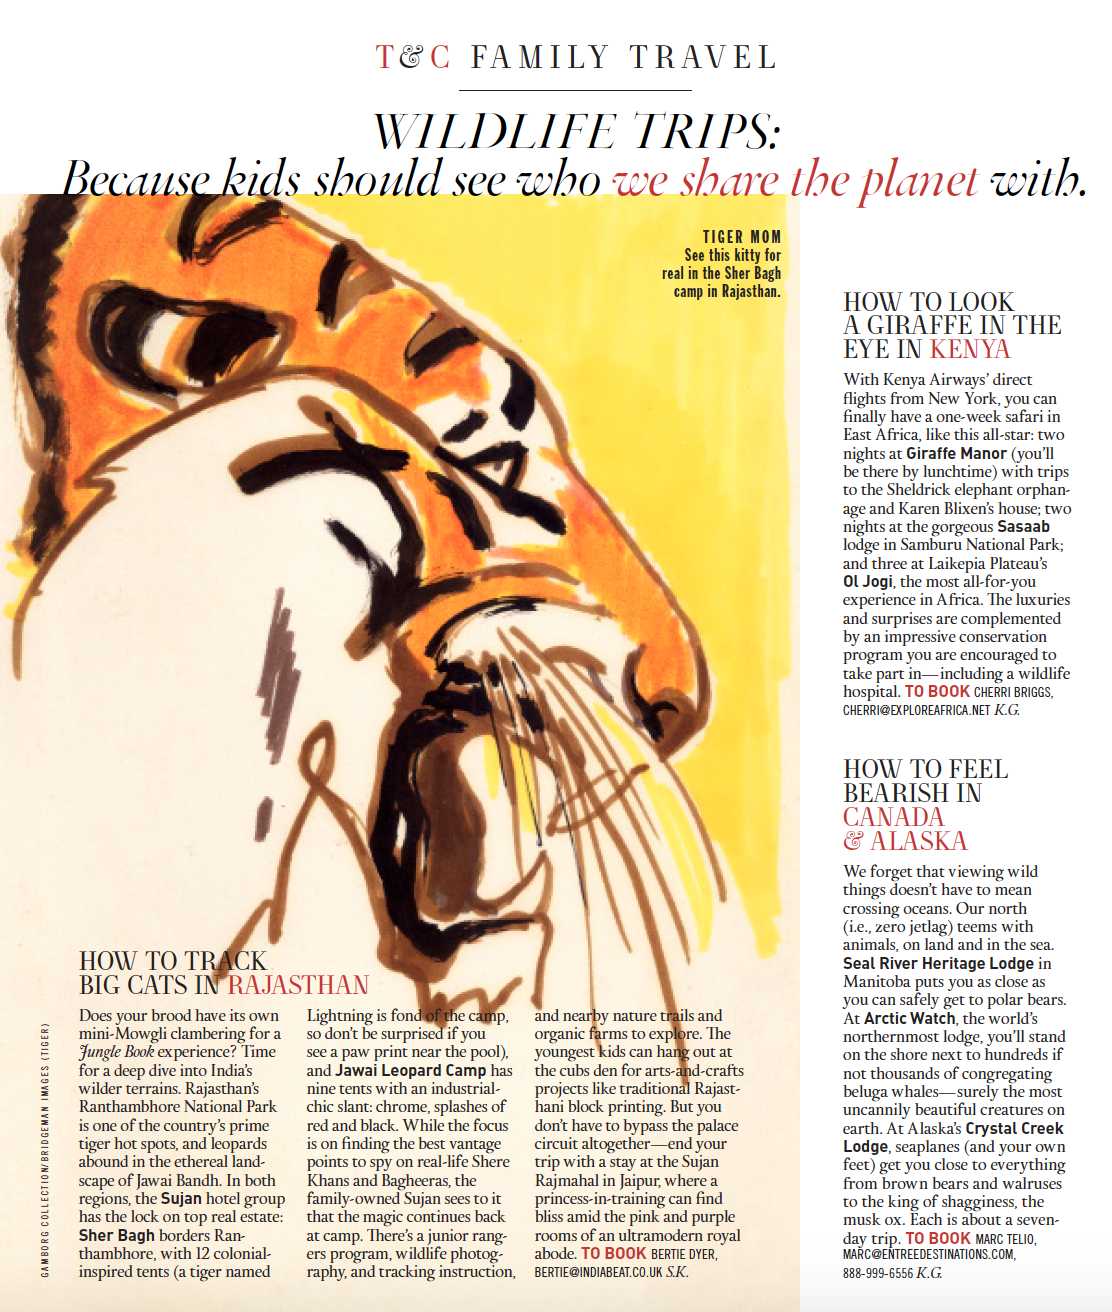 Town & Country: How to Track Big Cats in Rajasthan